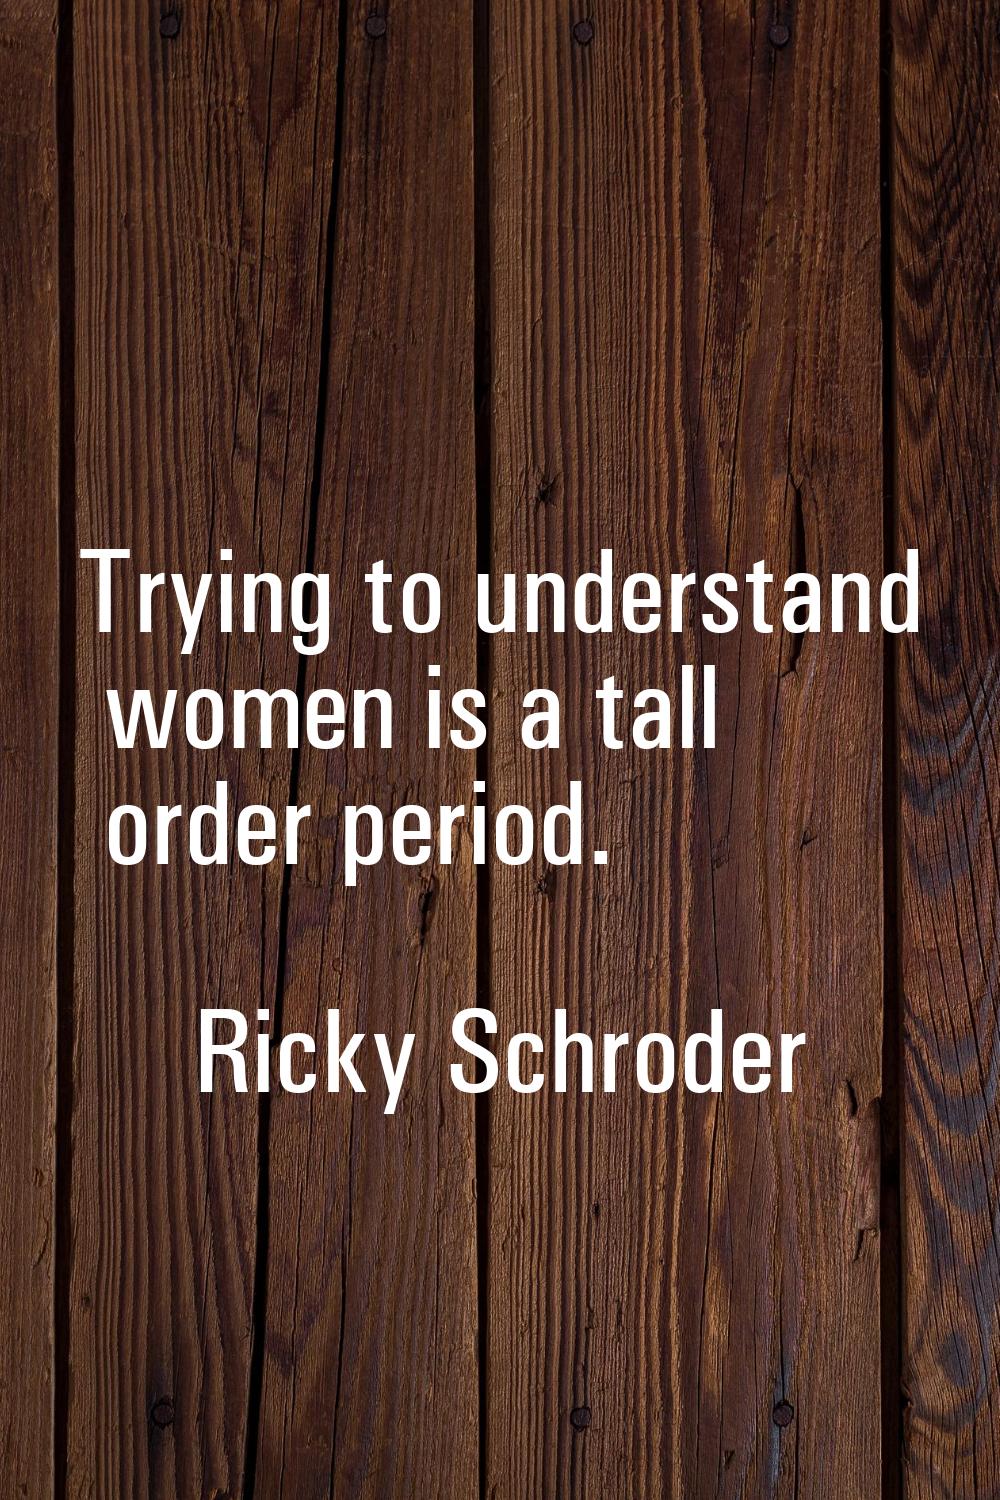 Trying to understand women is a tall order period.